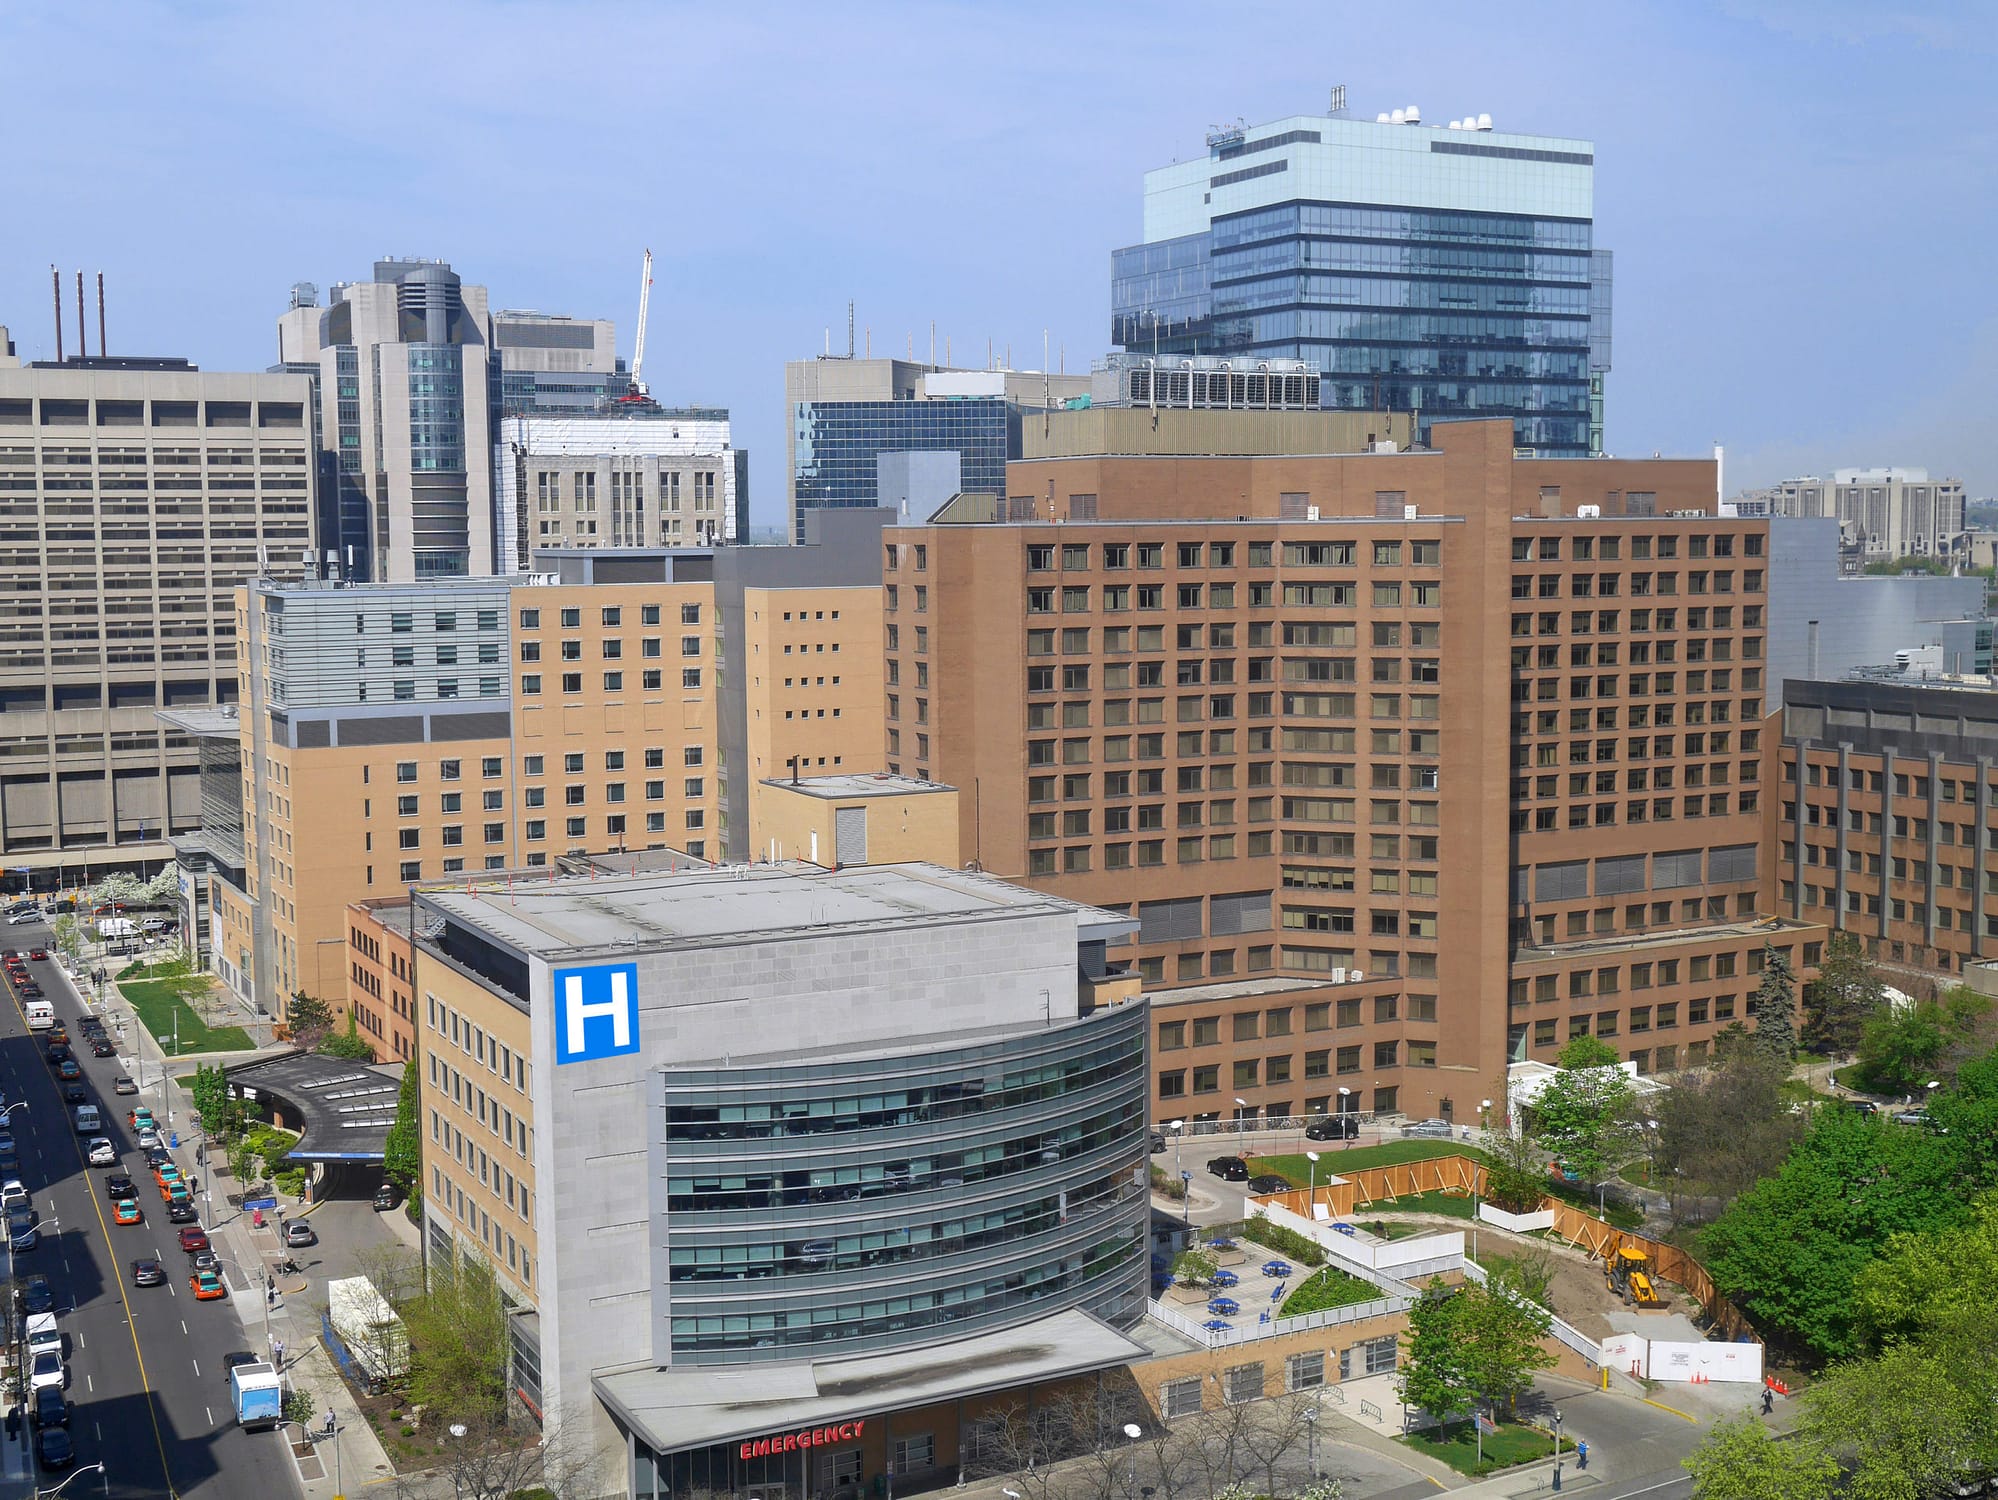 Cluster of large urban hospital and office buildings